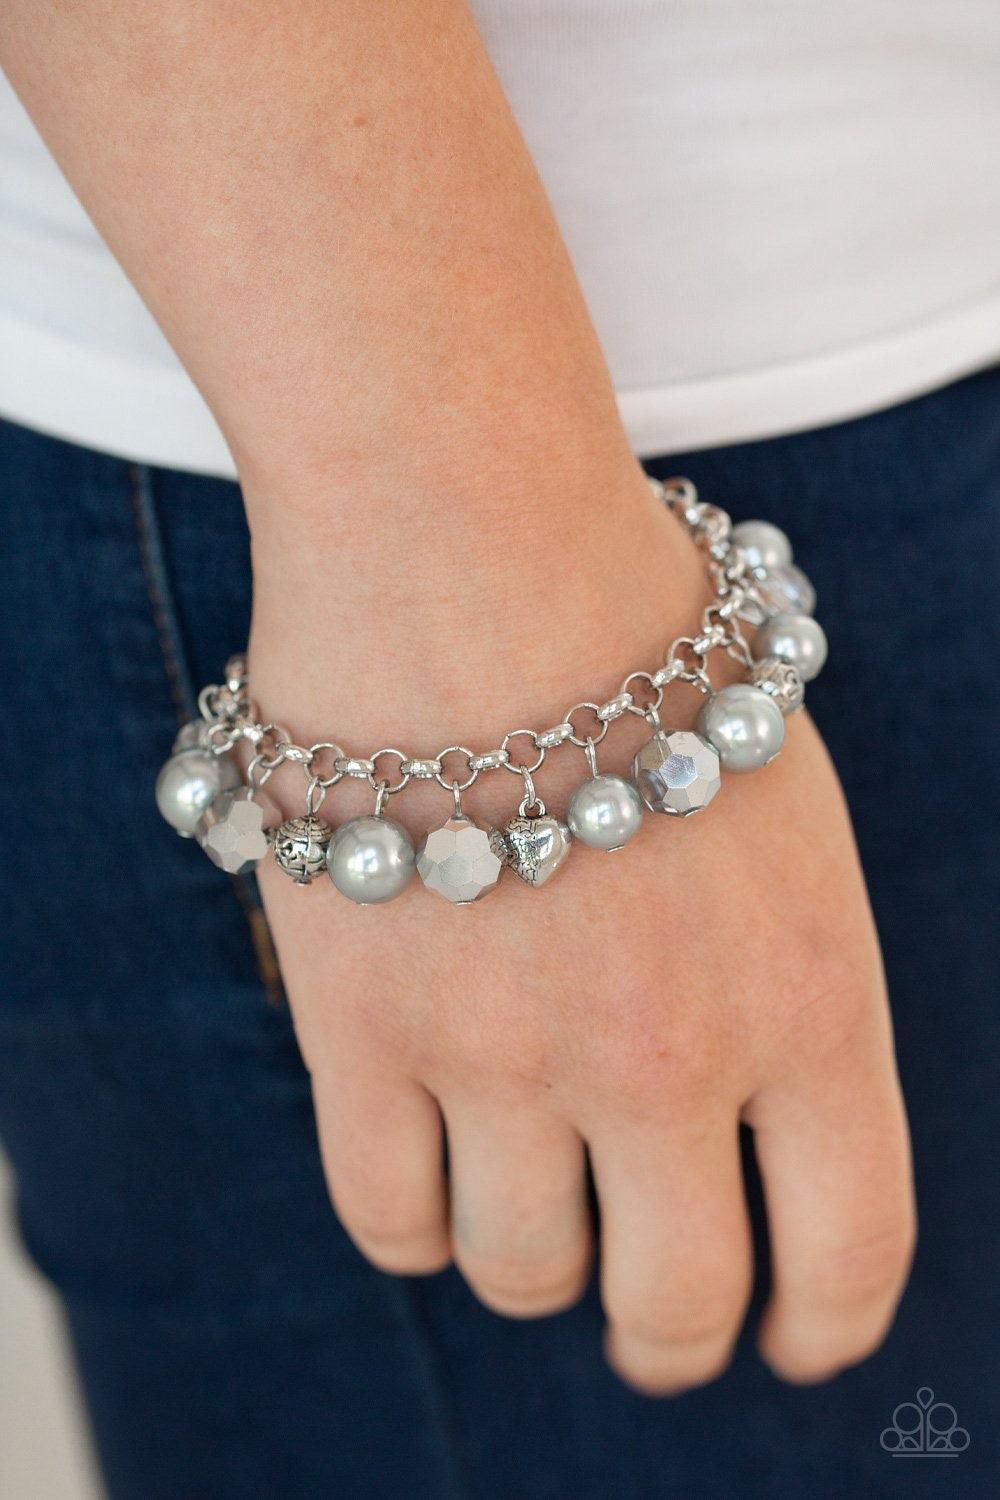 Paparazzi Accessories Cupid Couture - Silver Featuring a dainty silver heart charm, rose charm, and ornate silver beads, a refined collection of white pearls and metallic crystal-like beads swing from the wrist for a flirtatious flair. Features an adjusta